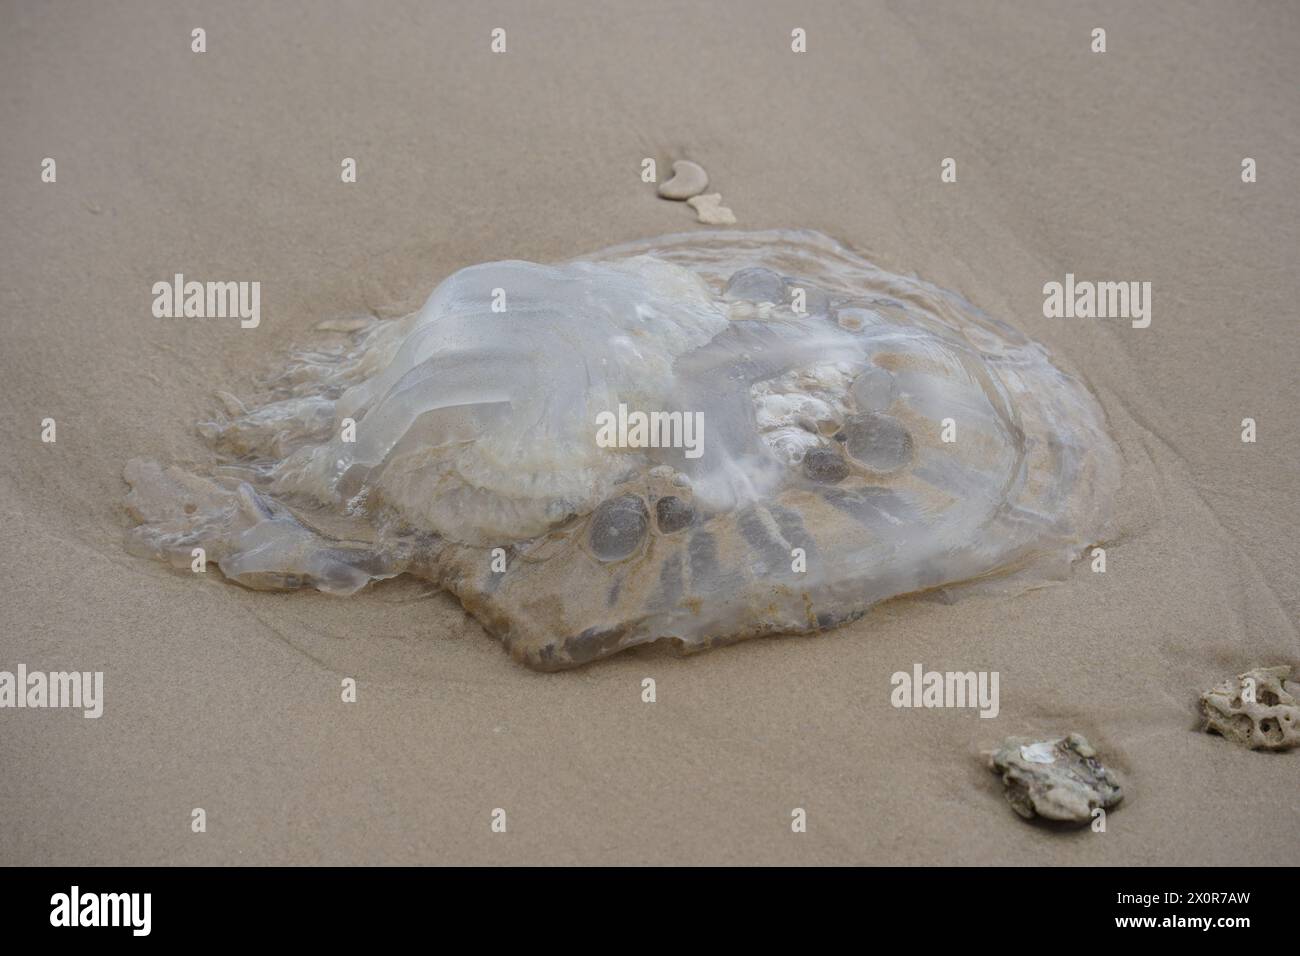 Rhopilema nomadica jellyfish at the Mediterranean seacoast.  Vermicular filaments with venomous stinging cells  can cause painful injuries to people Stock Photo